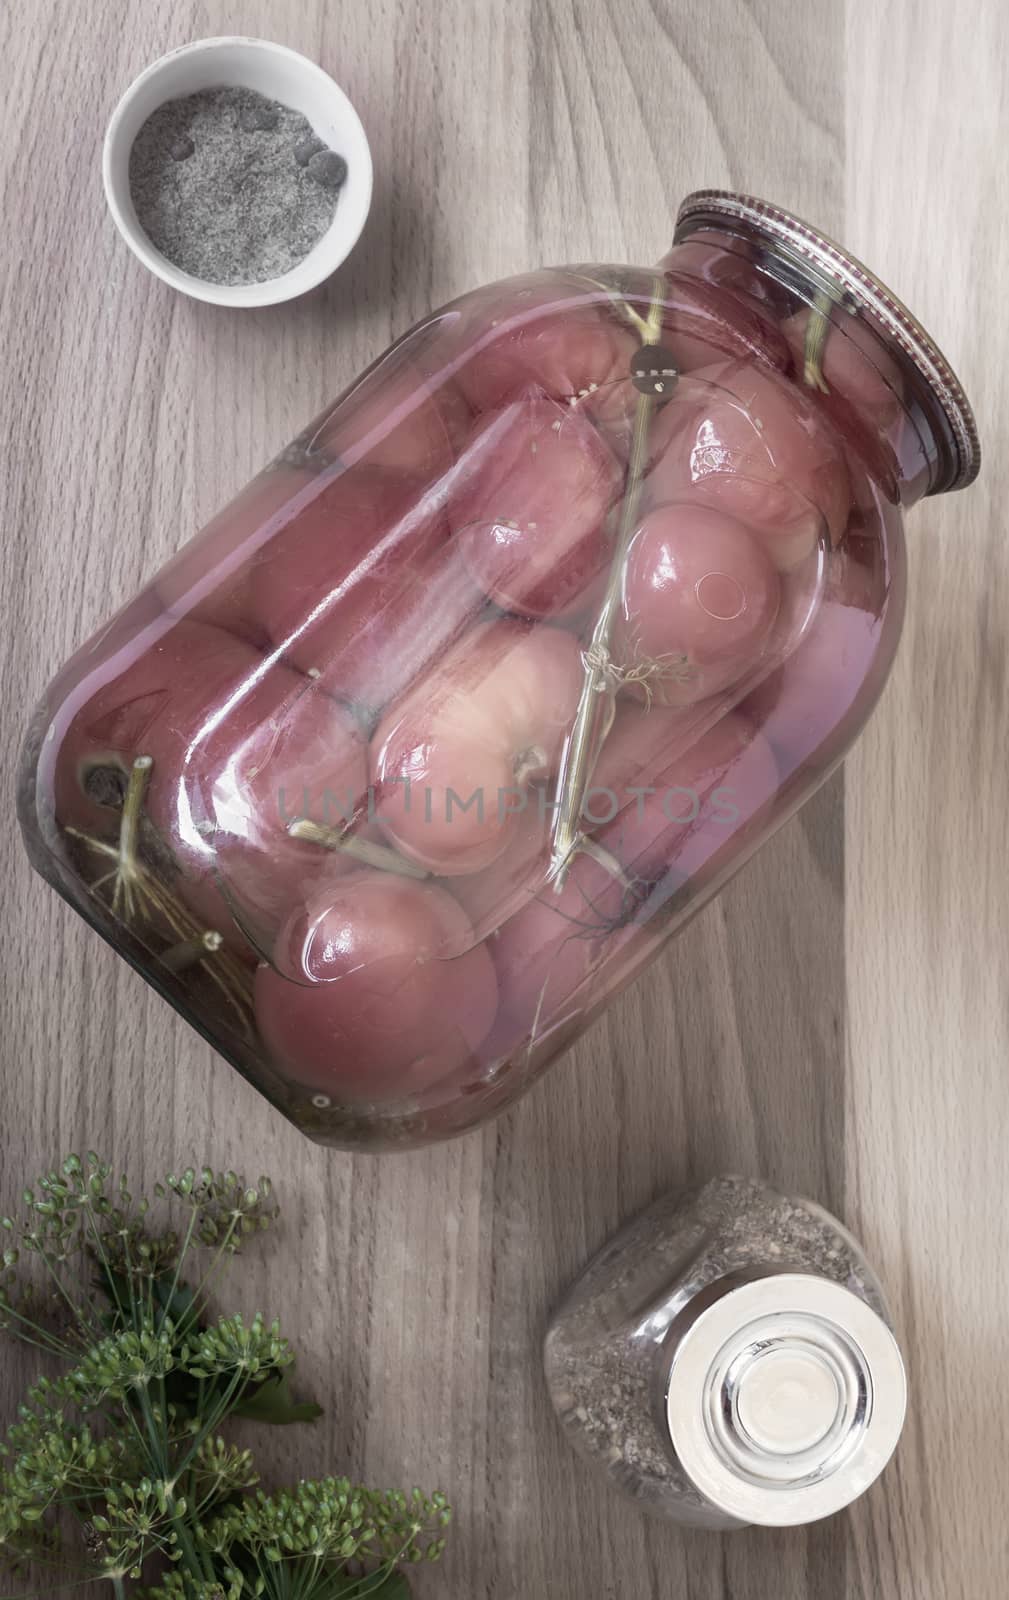 Canned tomatoes in a large glass jar. by georgina198